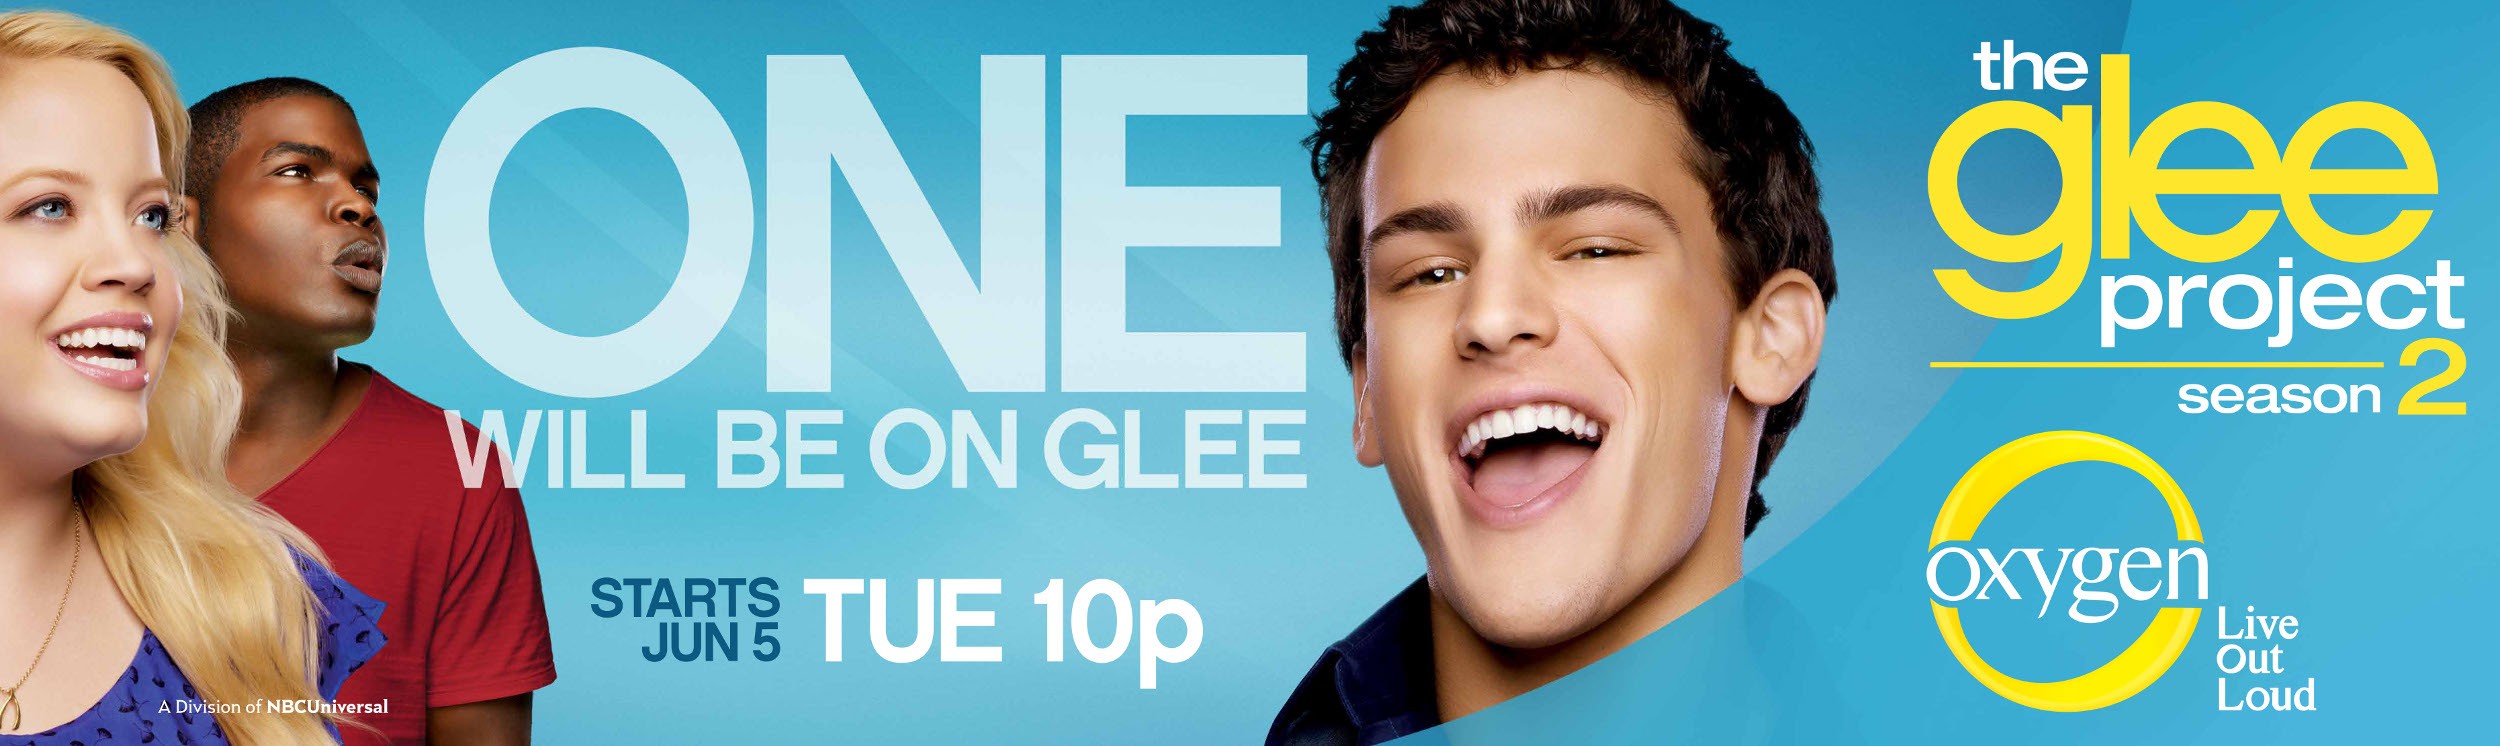 Mega Sized TV Poster Image for The Glee Project (#4 of 5)